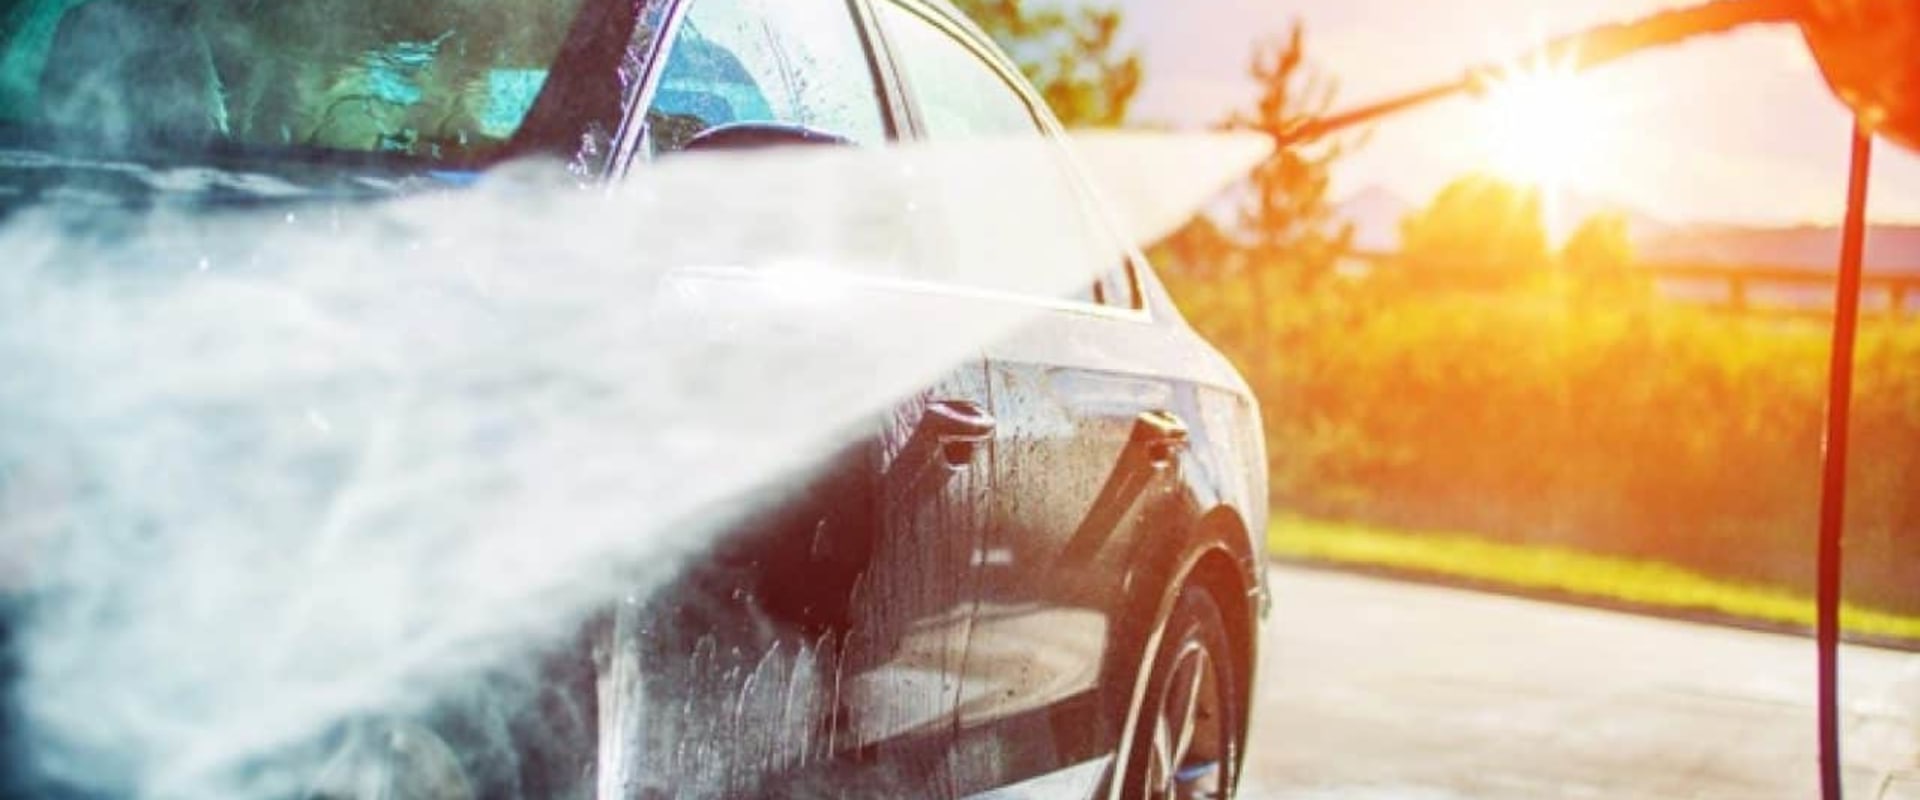 How to mobile car wash?